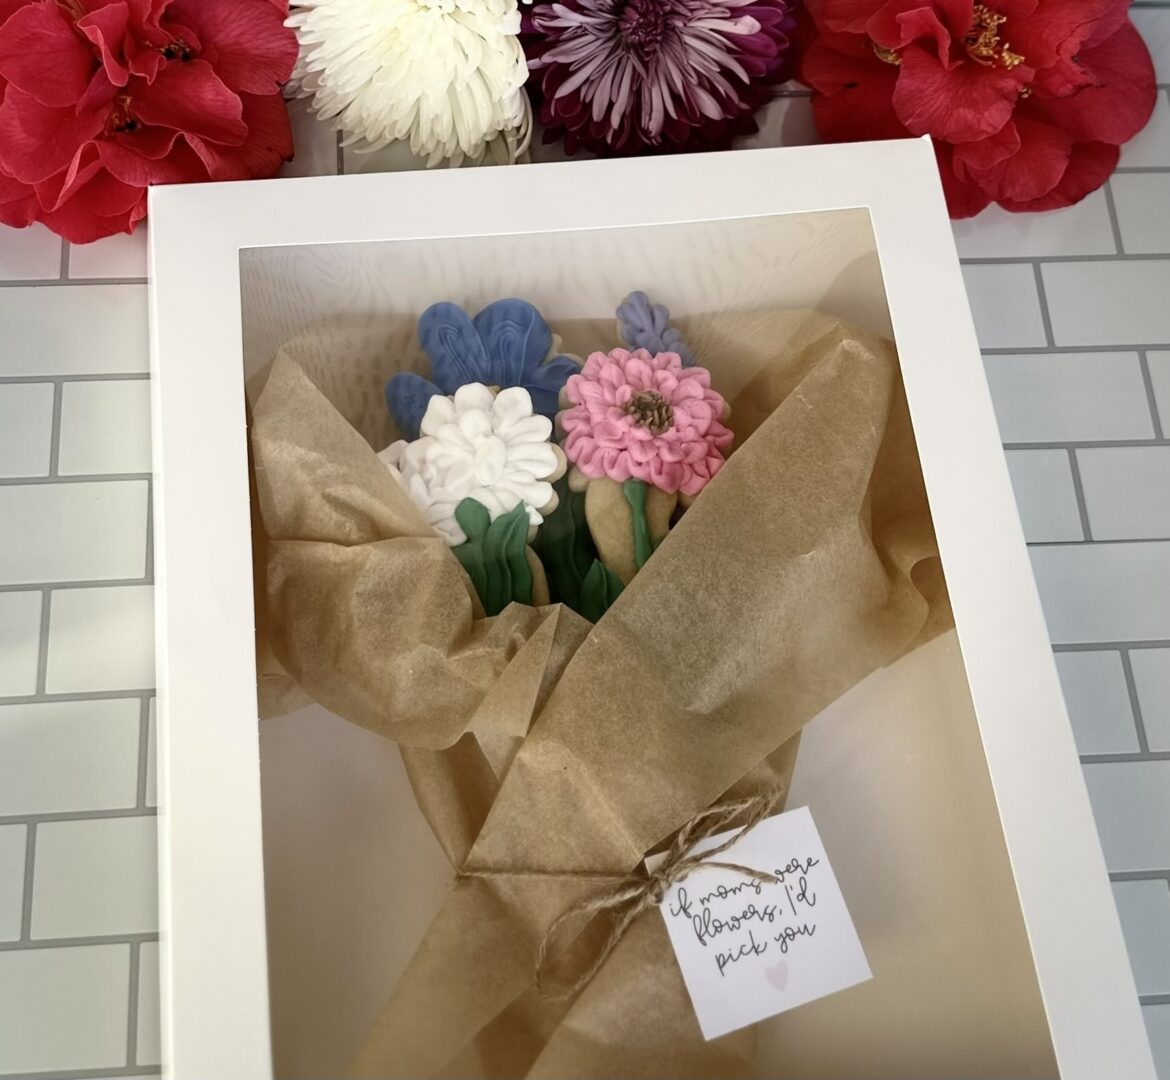 A bouquet of flowers in a case with a label on it.